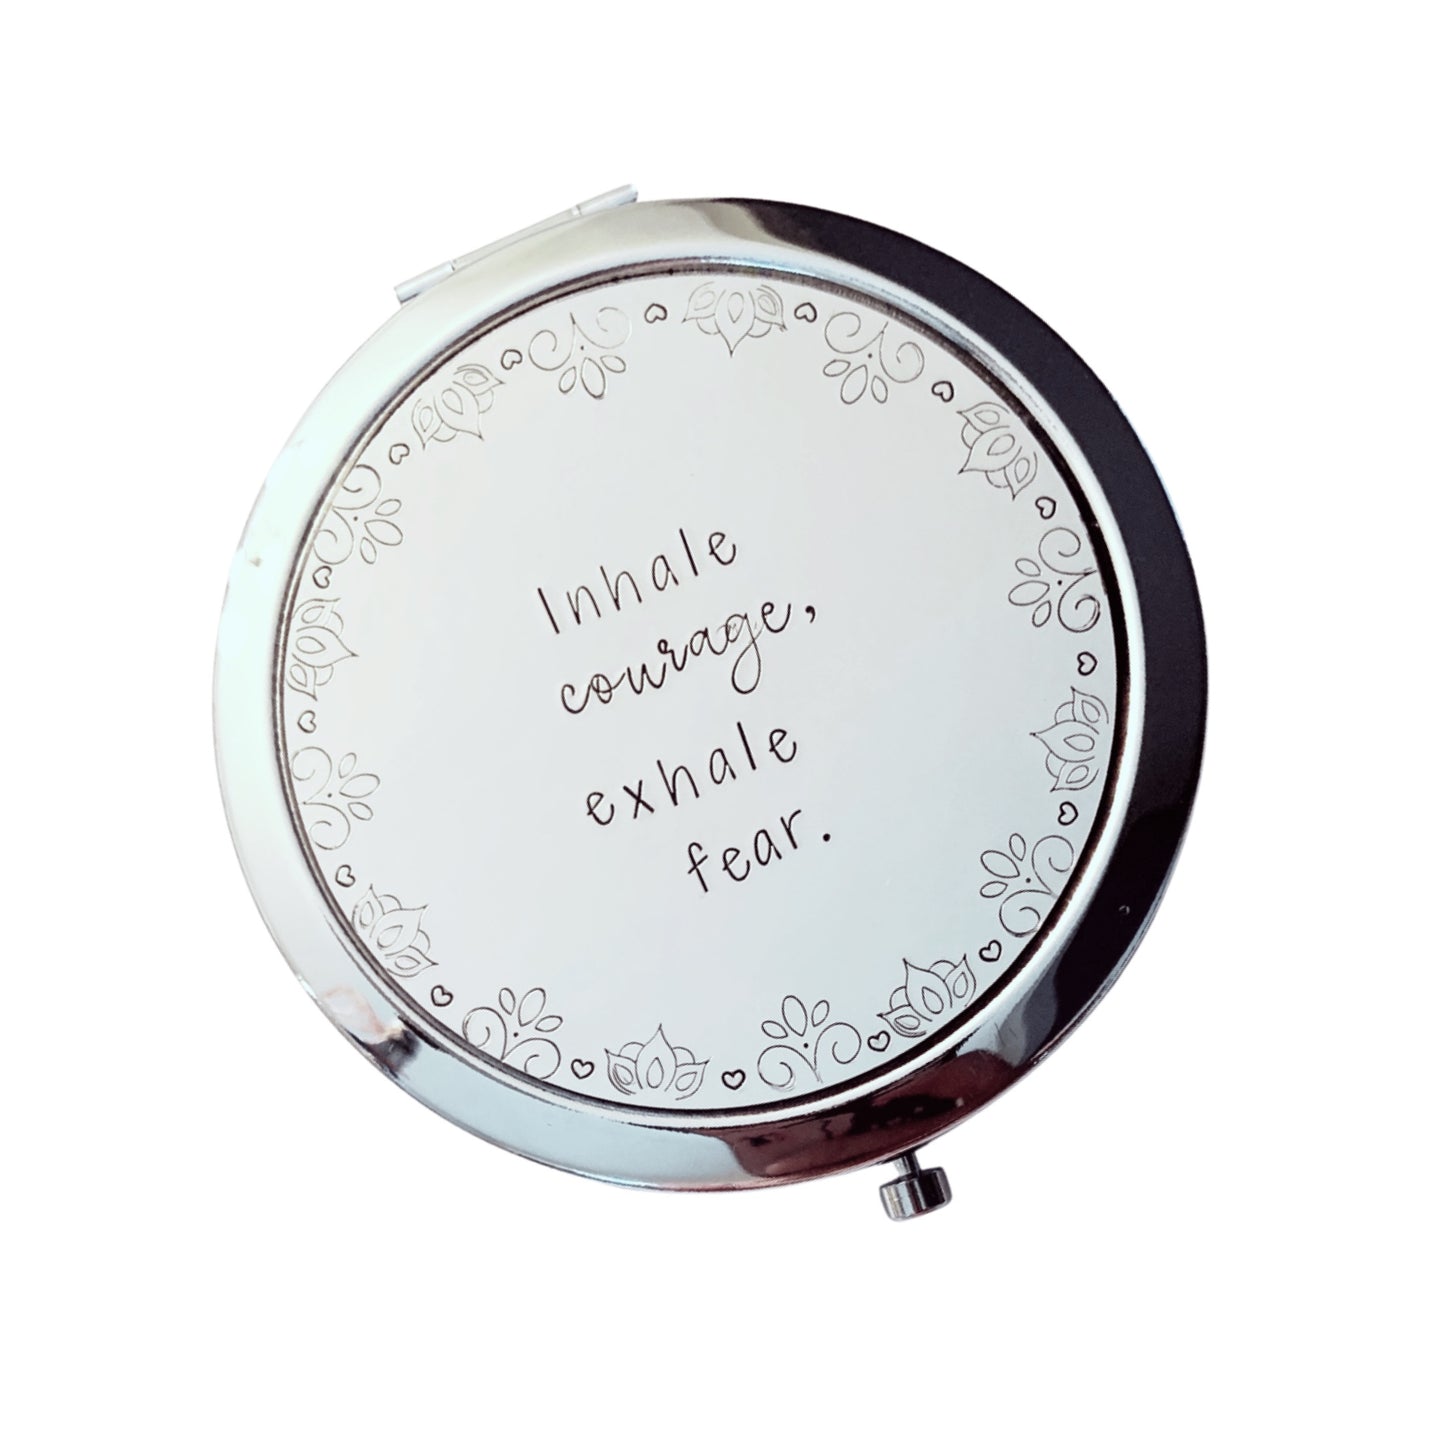 Inhale Courage, Exhale Fear - Compact Mirror